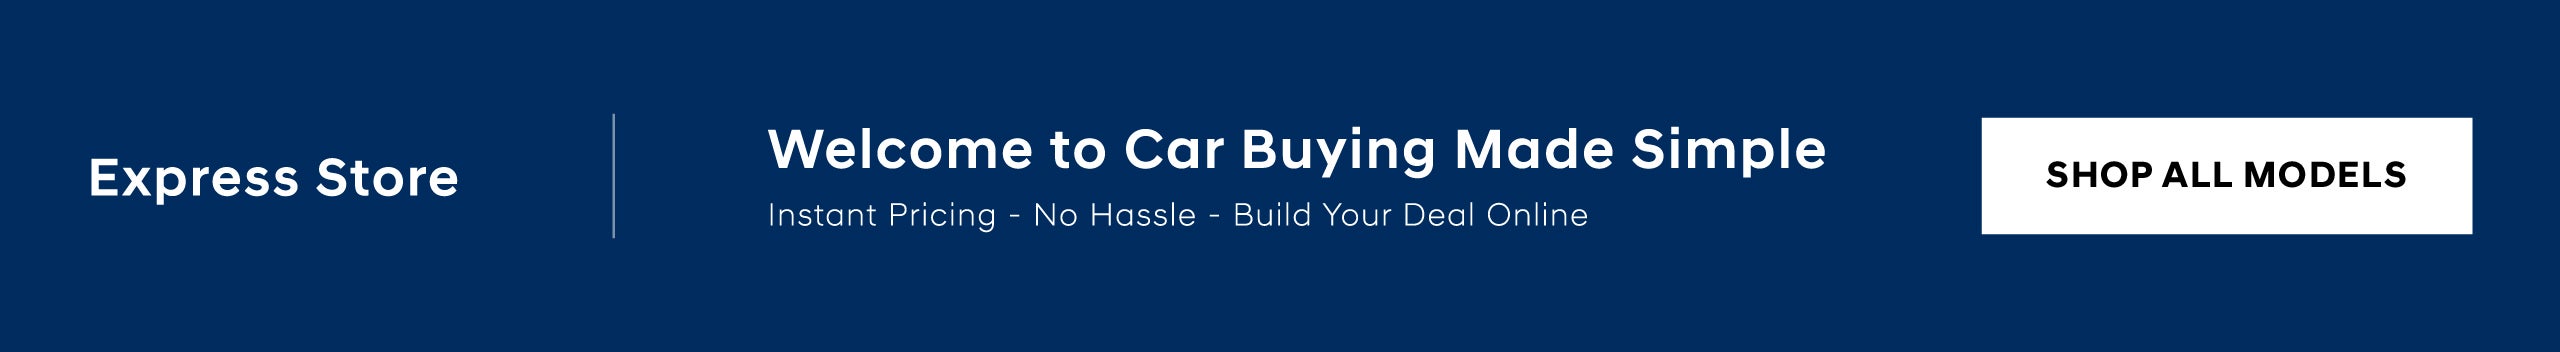 Welcome to Car Buying Made Simple